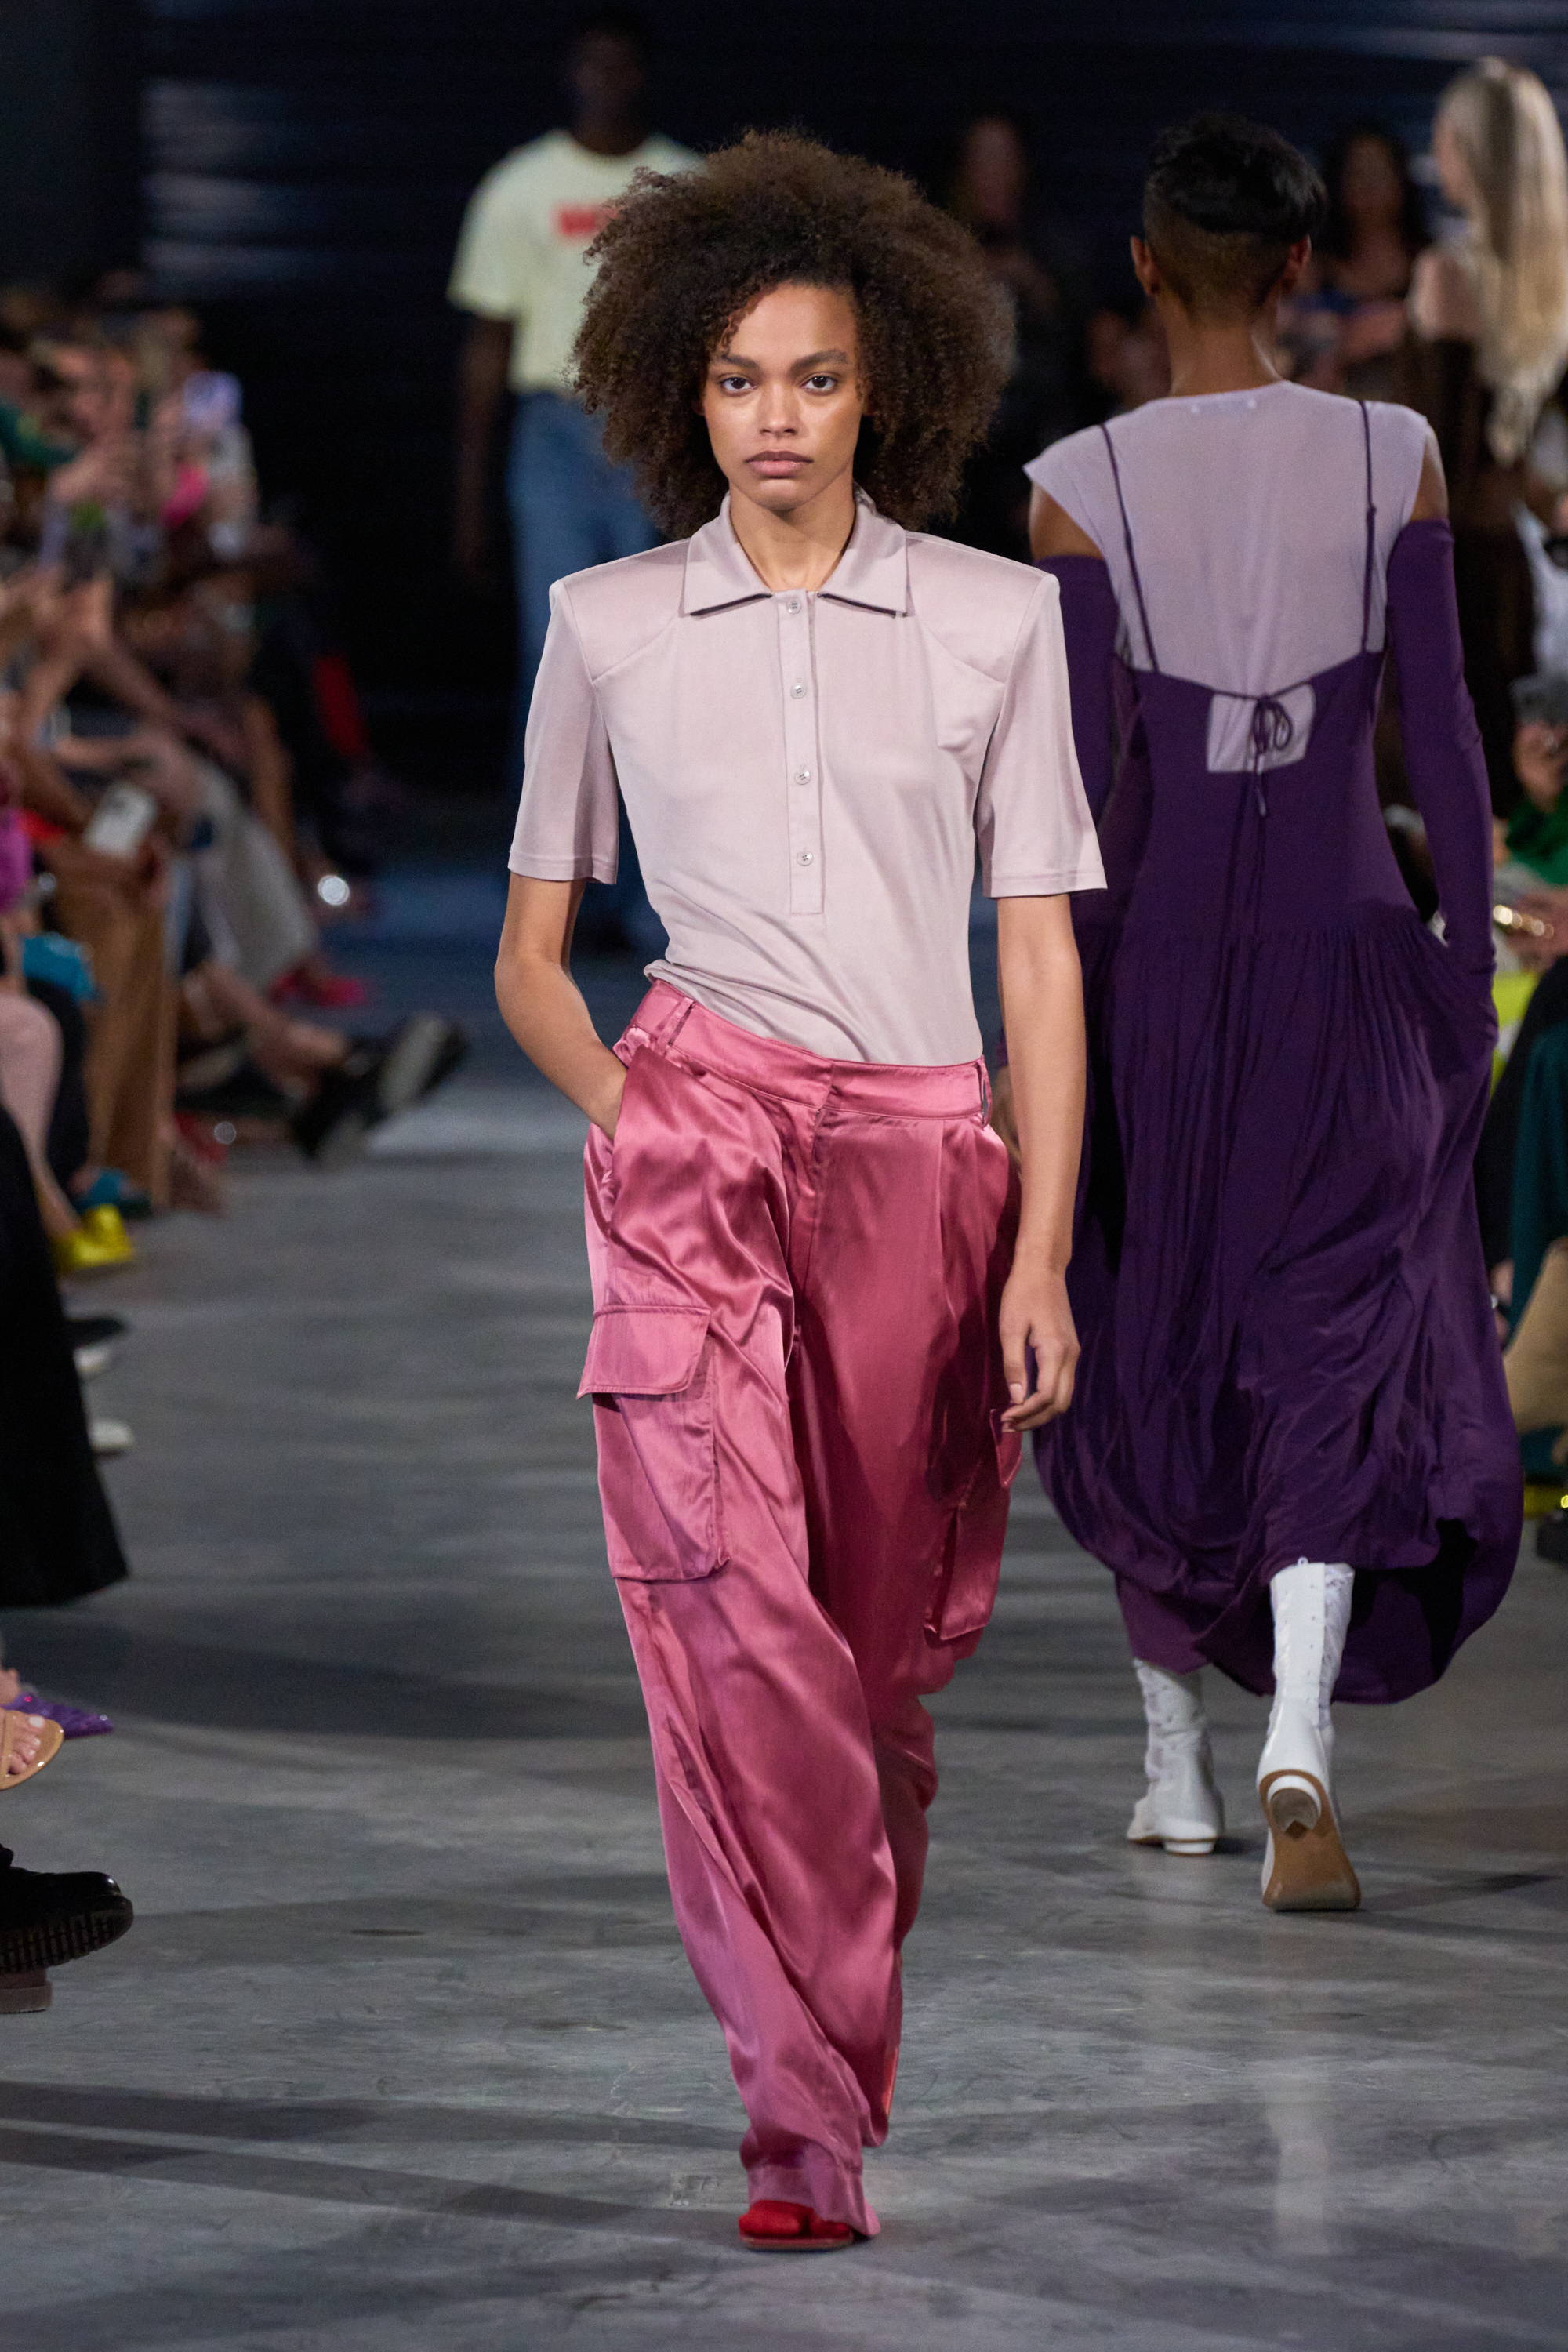 Model on a runway wearing polo and pants